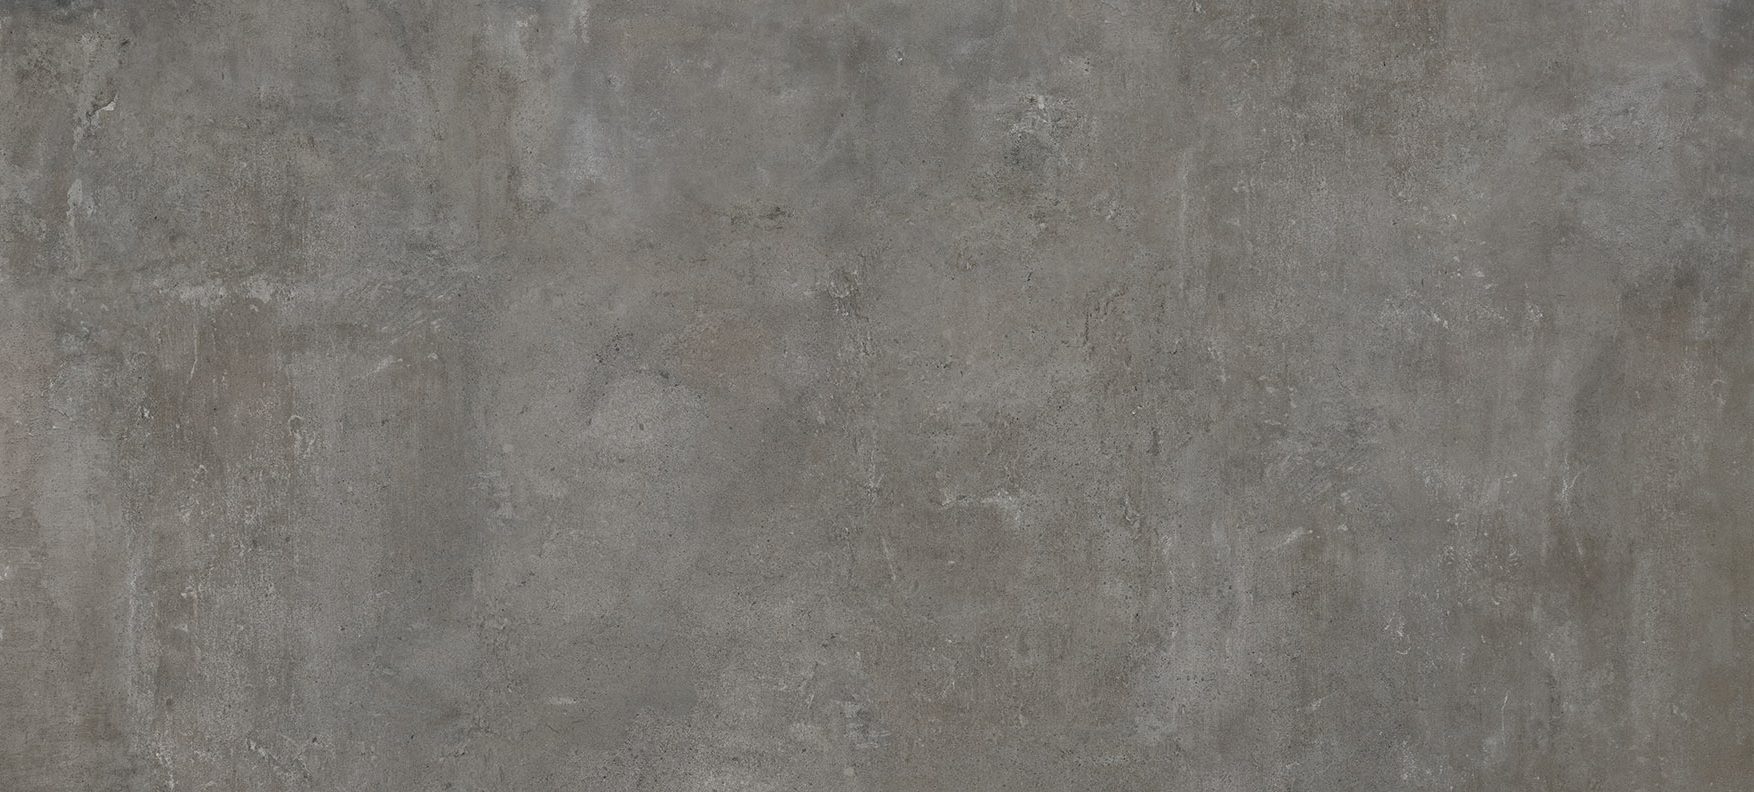 softcement-graphite-120x280-1-rotated-1